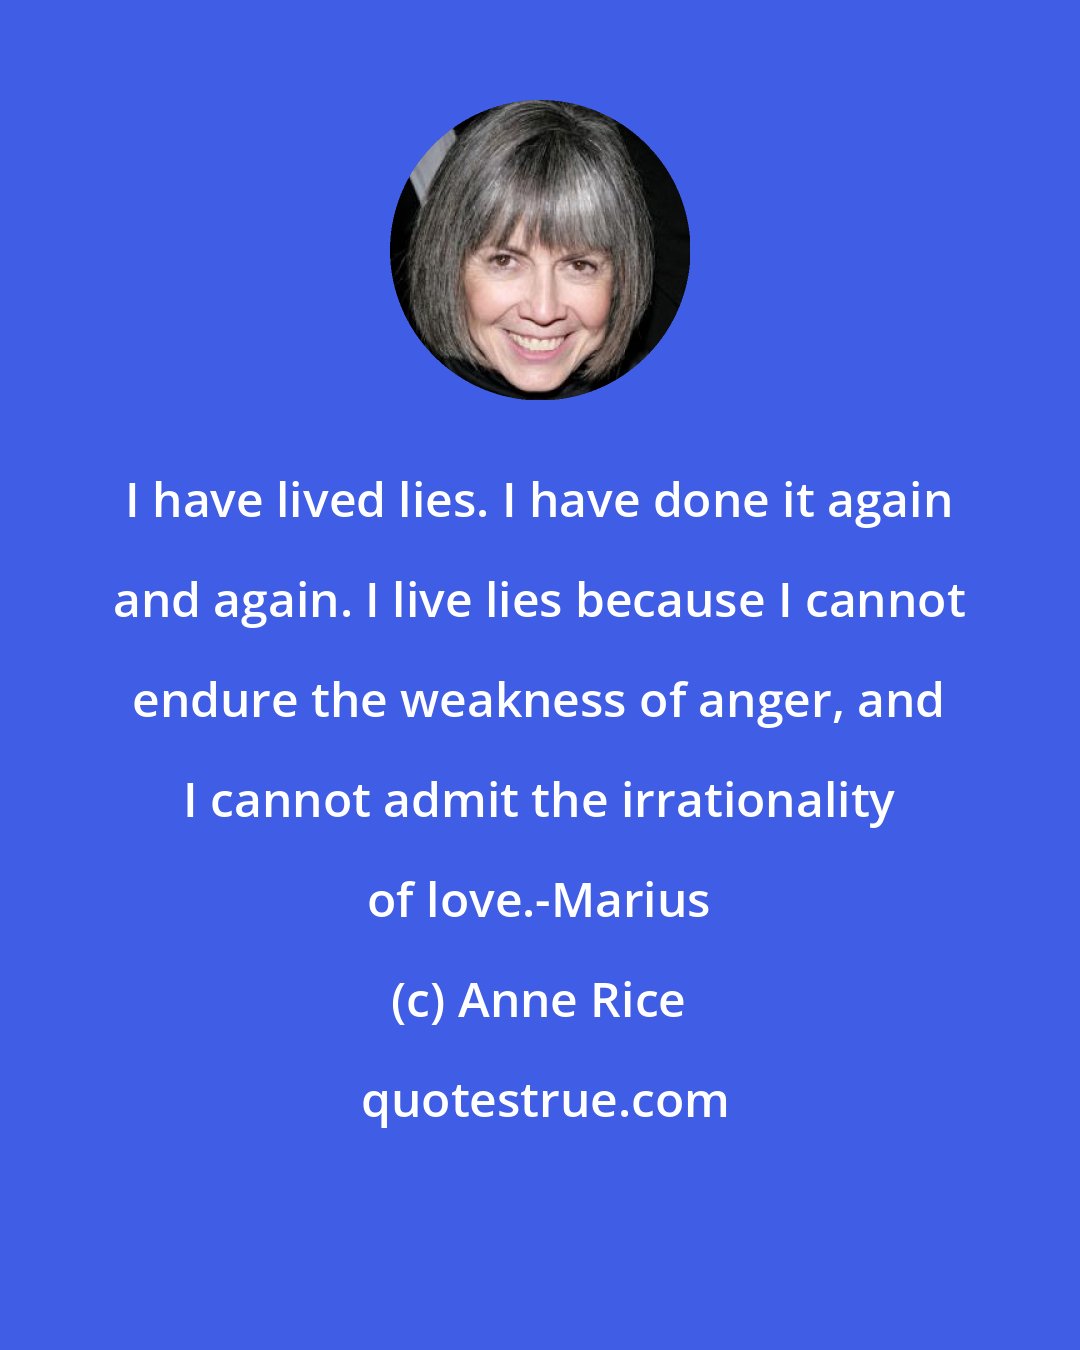 Anne Rice: I have lived lies. I have done it again and again. I live lies because I cannot endure the weakness of anger, and I cannot admit the irrationality of love.-Marius